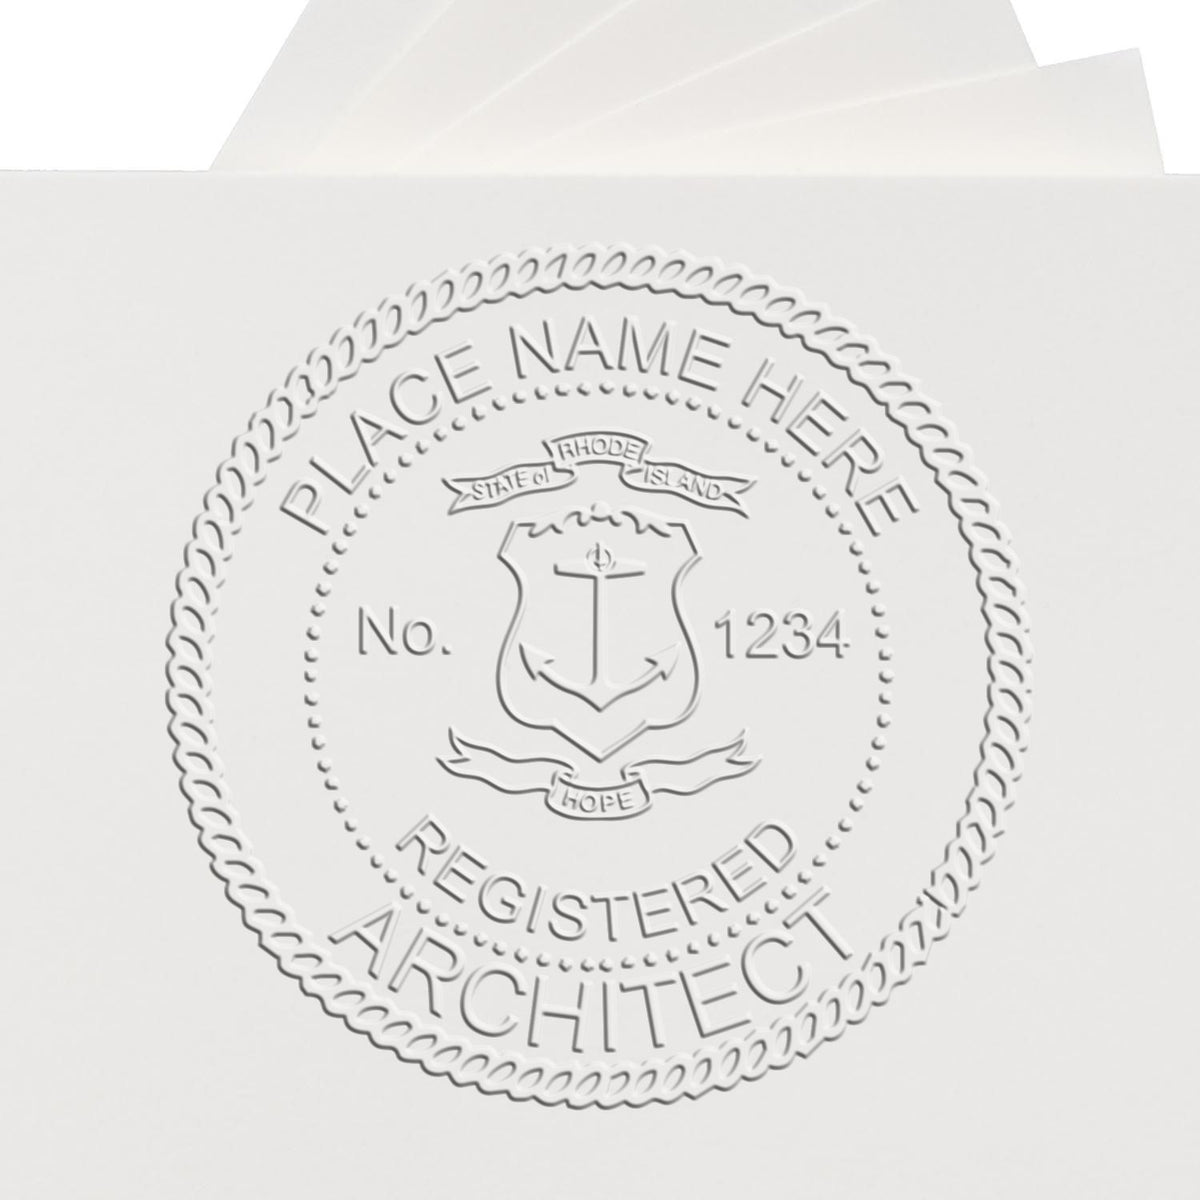 This paper is stamped with a sample imprint of the Extended Long Reach Rhode Island Architect Seal Embosser, signifying its quality and reliability.